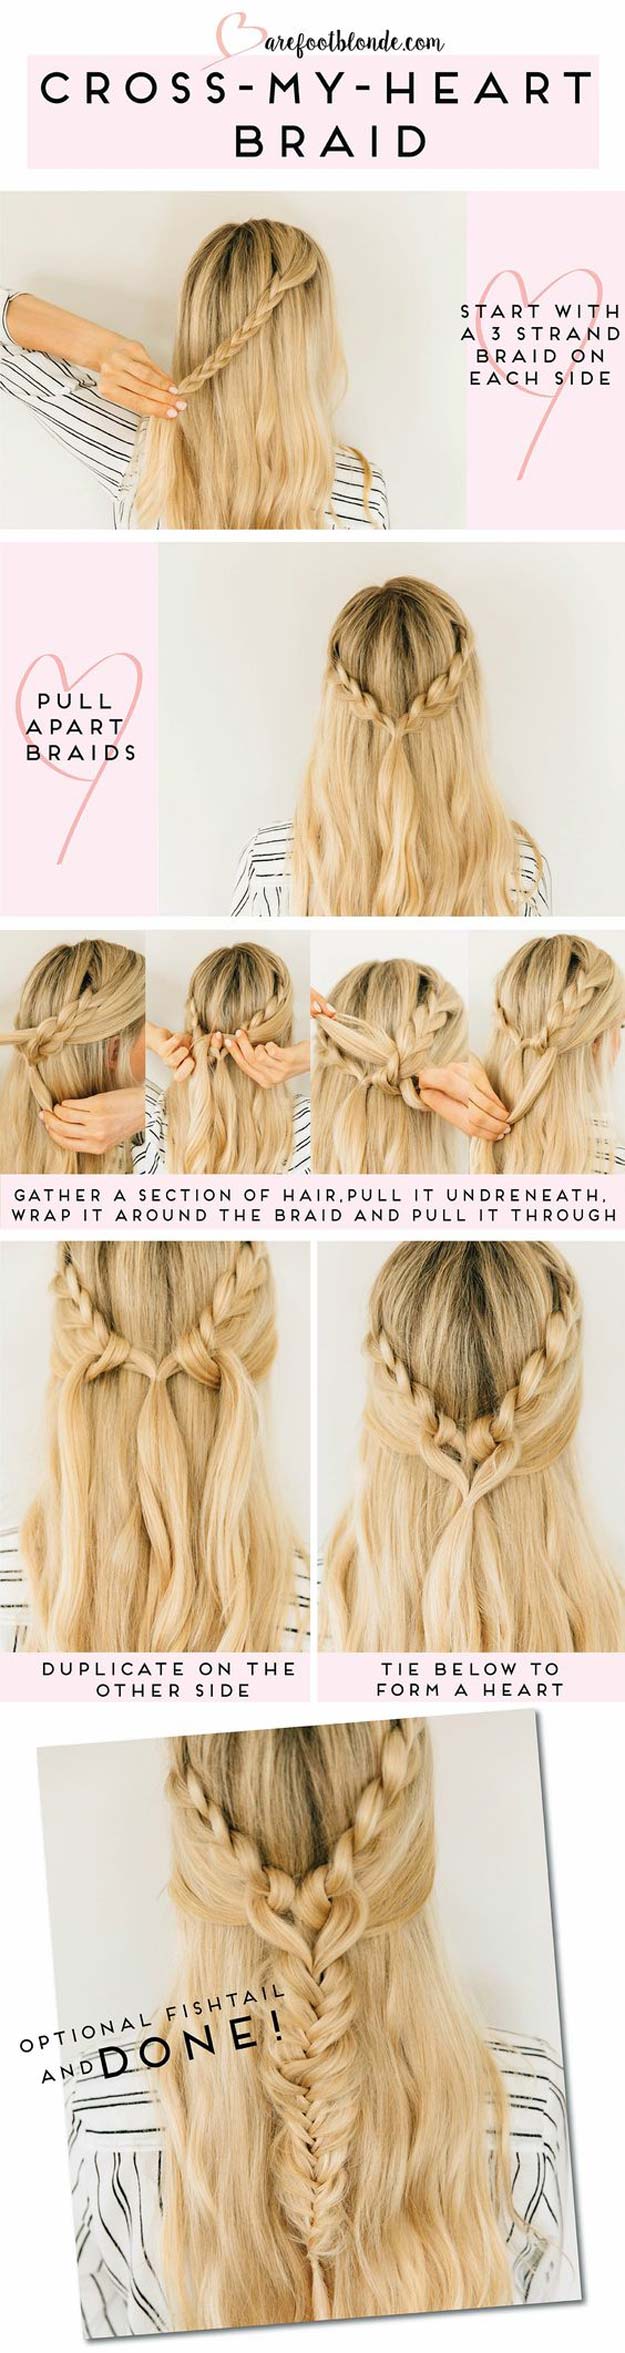 Best Hair Braiding Tutorials - Cross My Heart Braid - Easy Step by Step Tutorials for Braids - How To Braid Fishtail, French Braids, Flower Crown, Side Braids, Cornrows, Updos - Cool Braided Hairstyles for Girls, Teens and Women - School, Day and Evening, Boho, Casual and Formal Looks #hairstyles #braiding #braidingtutorials #diyhair 